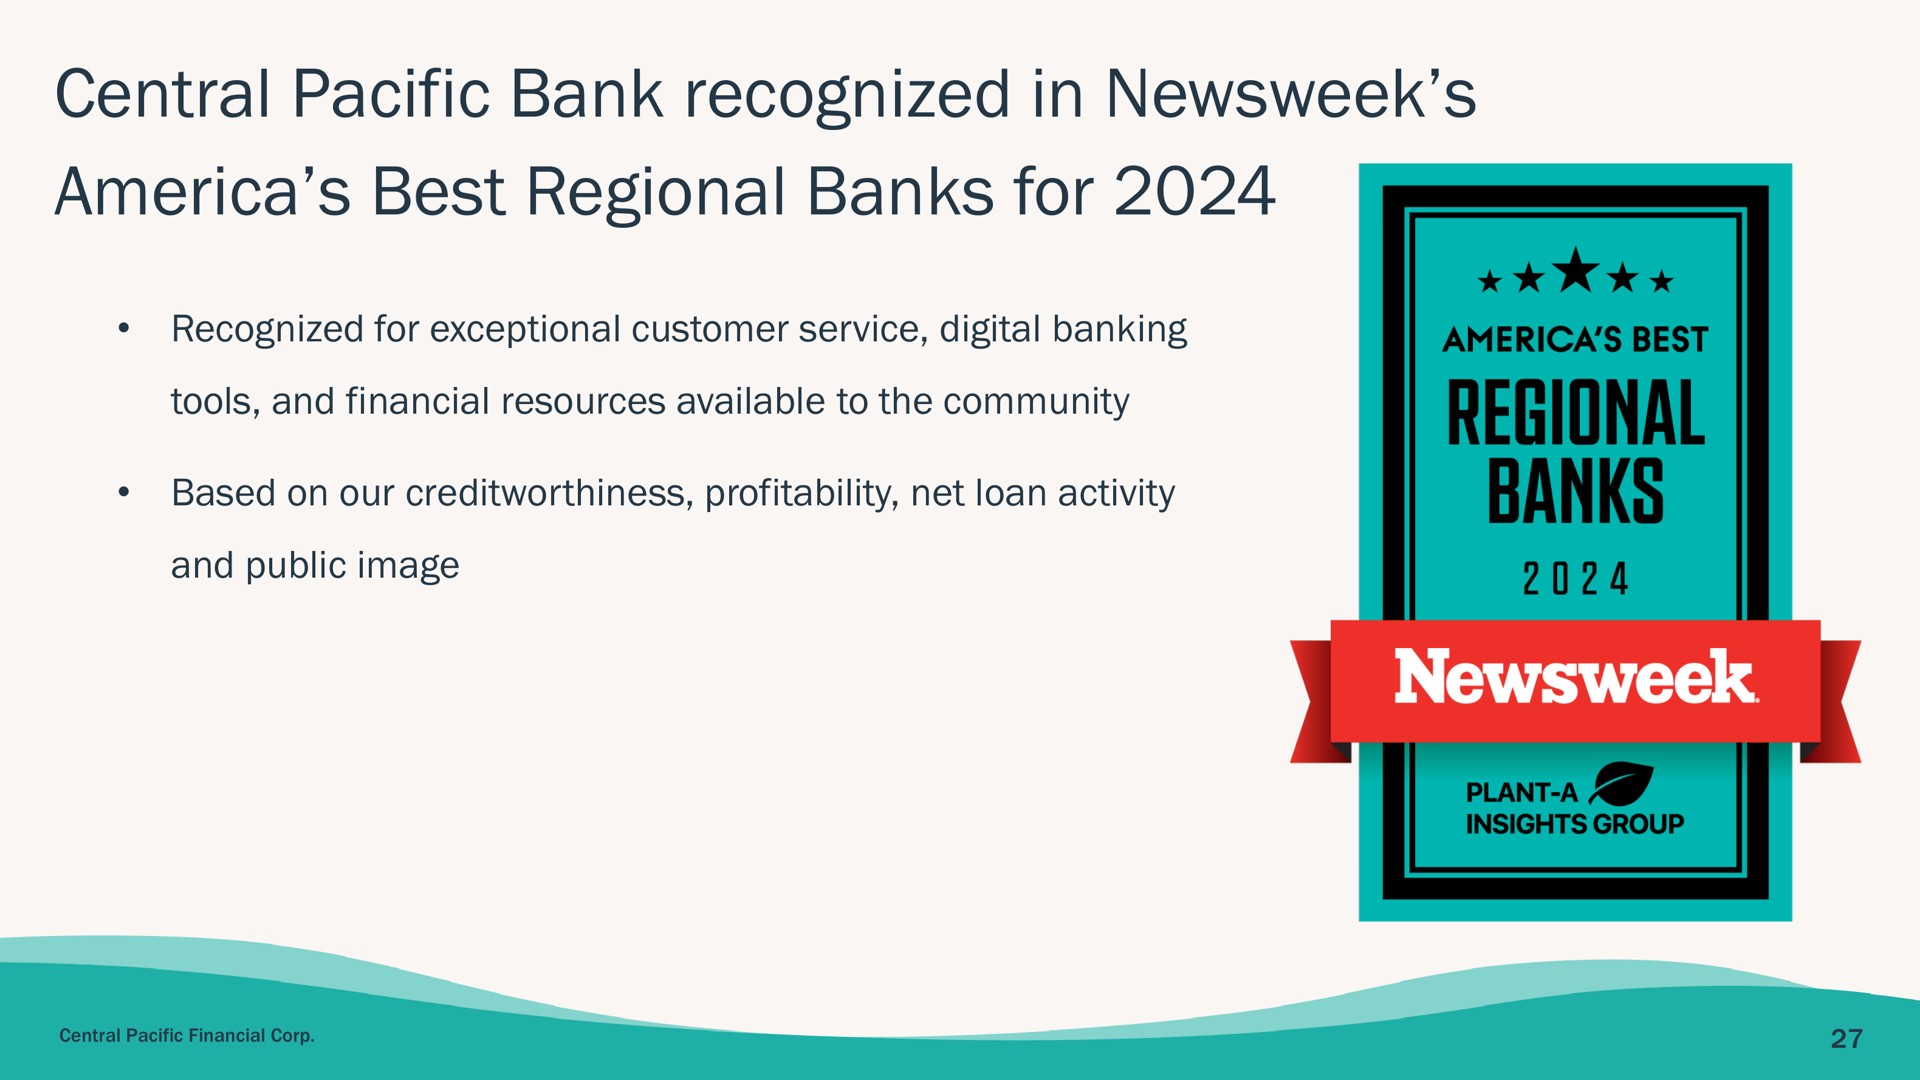 central pacific bank recognized in best regional banks for boo | Central Pacific Financial